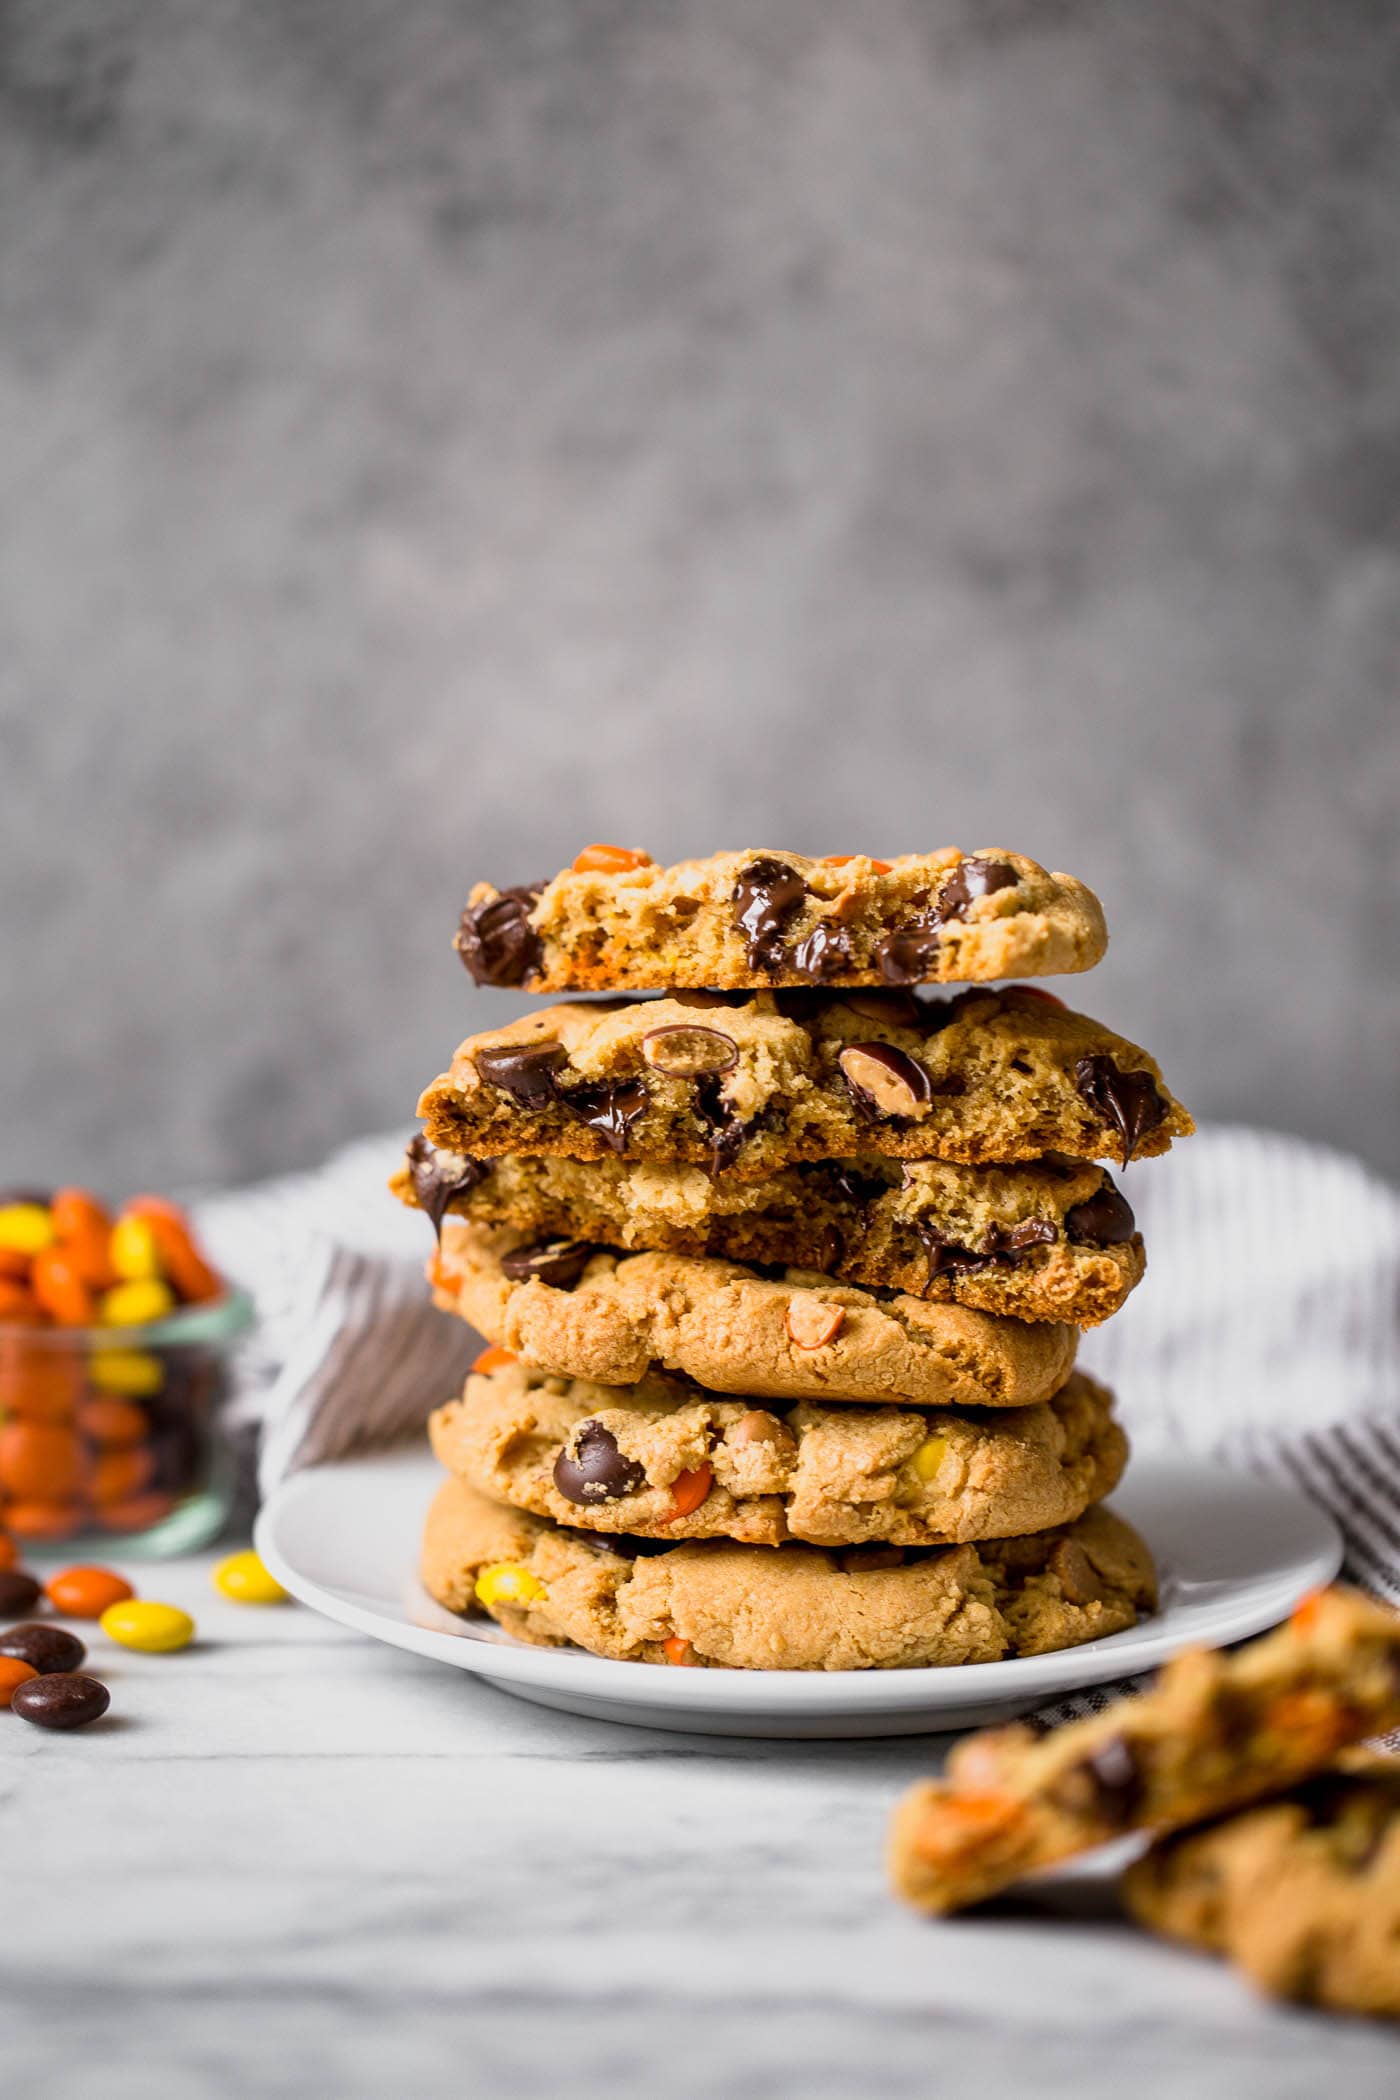 Giant Reese's Pieces Chocolate Chip Cookies are thick, chewy, chunky, and soft. Another incredible combination of peanut butter and chocolate!